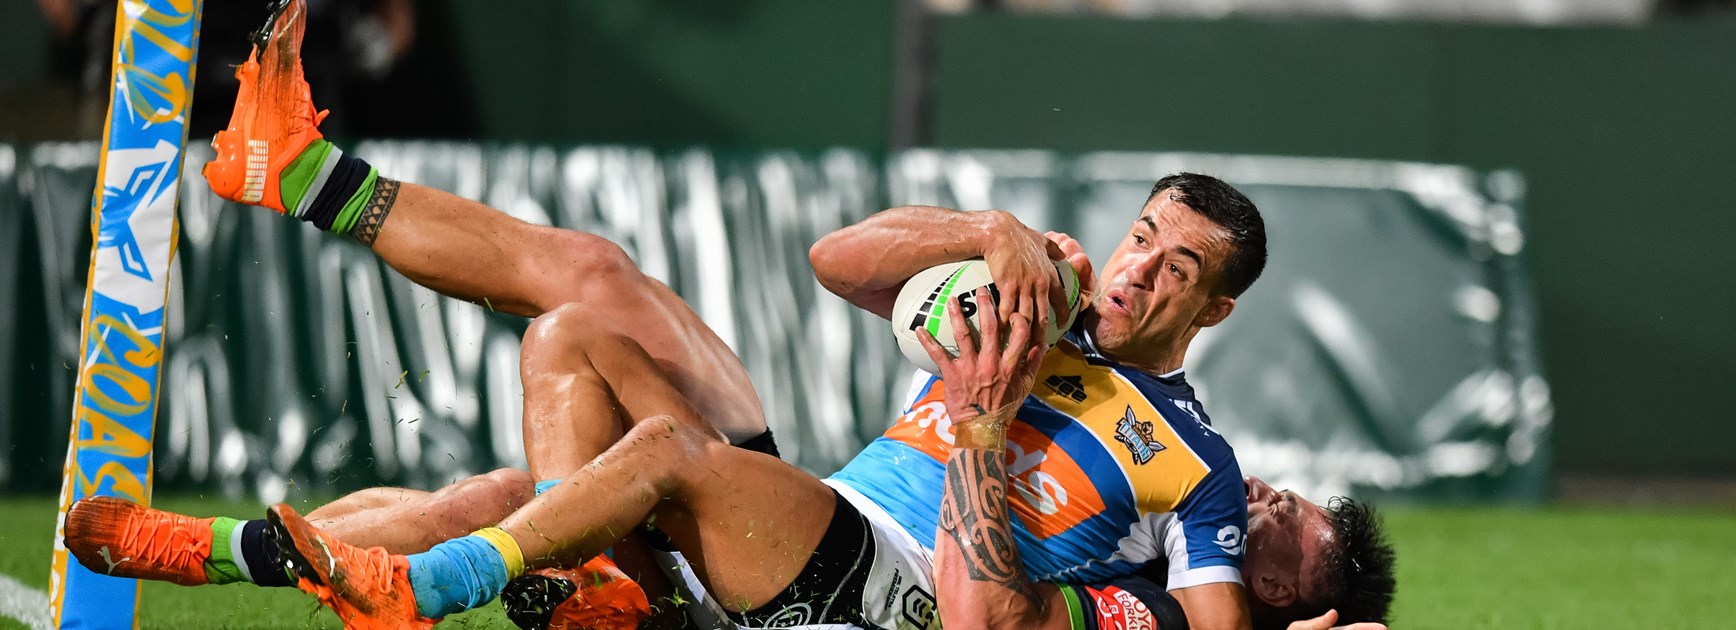 Gritty Titans push Raiders in Sydney despite injuries to key players